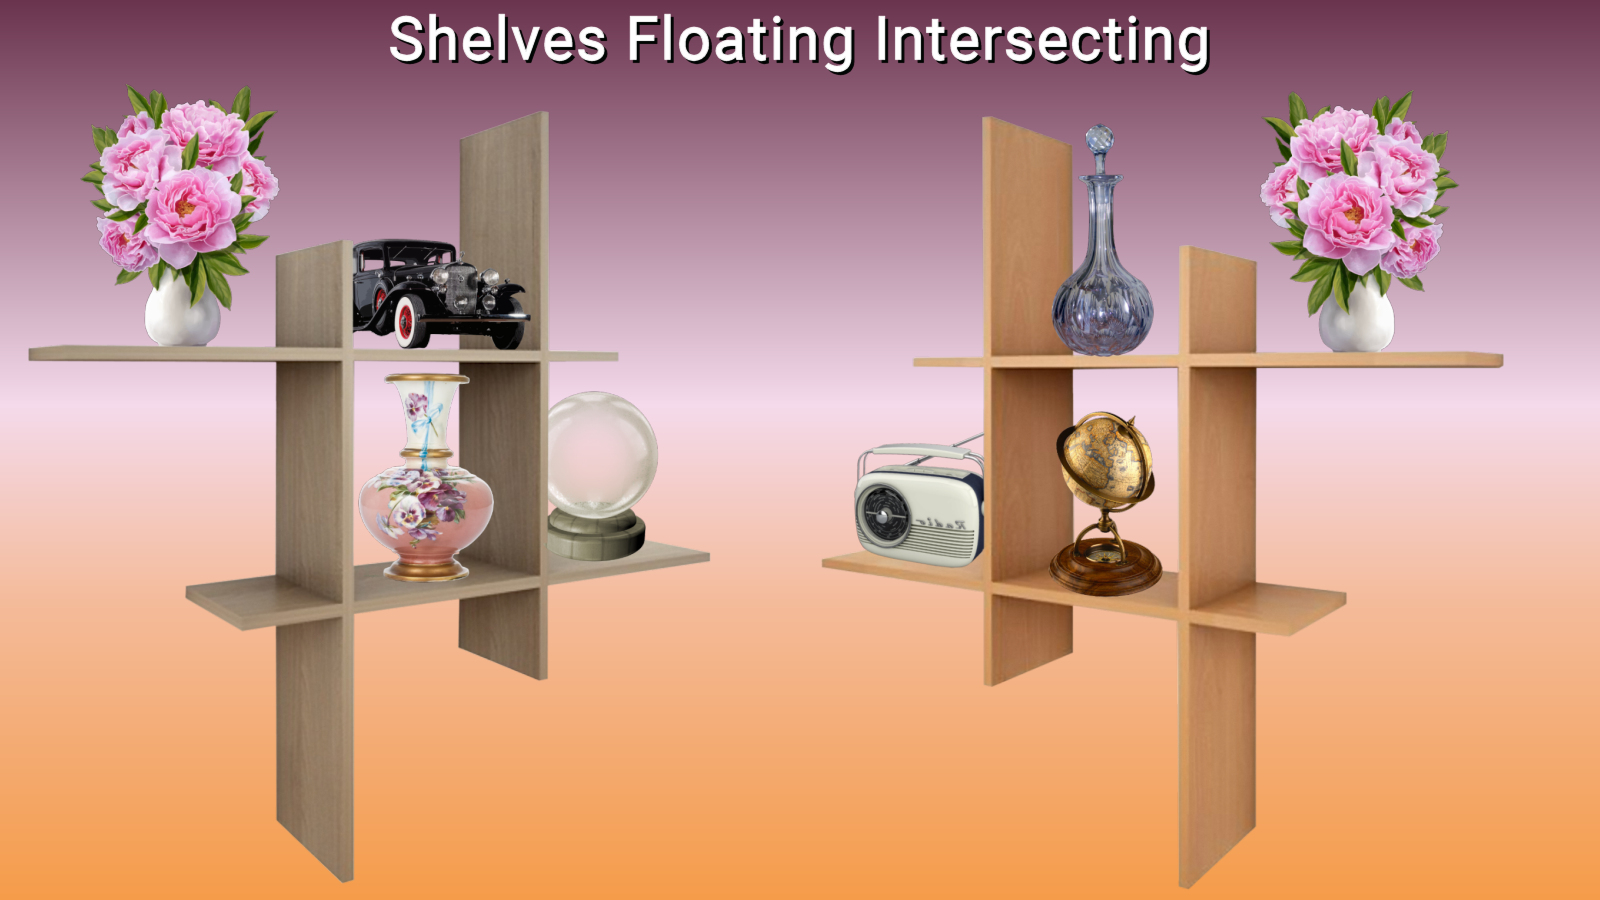 Shelves Floating Intersecting